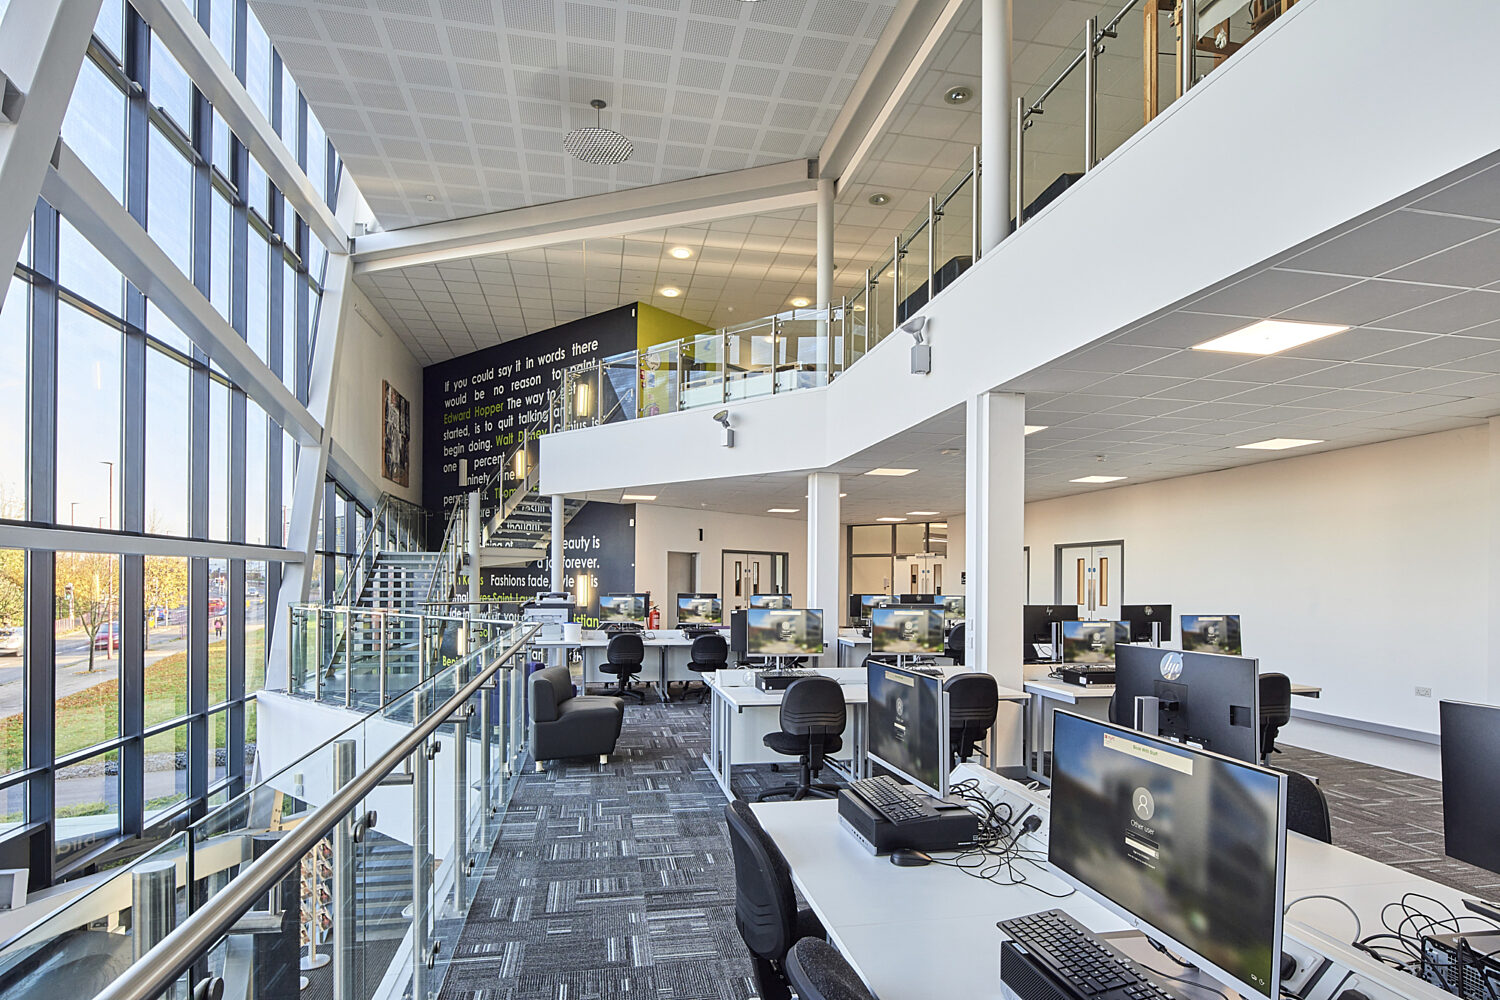 Dudley College of Technology mezzanine workspace filled with natural light